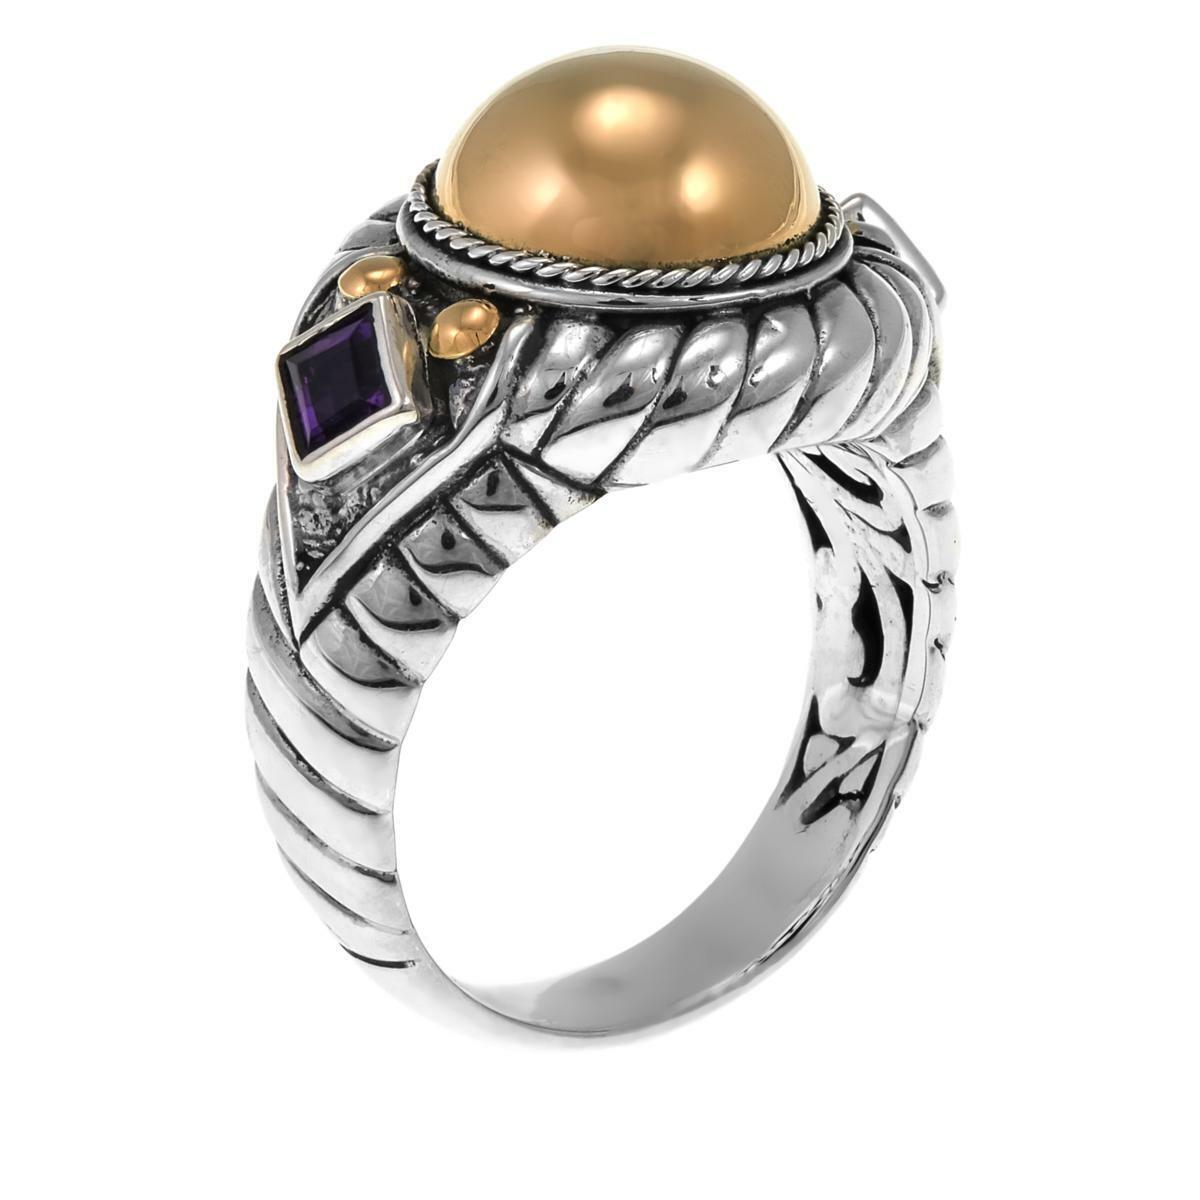 Bali Designs 2-Tone 0.22Ctw Amethyst Cable-Twist Ring Size 10 Hsn $221